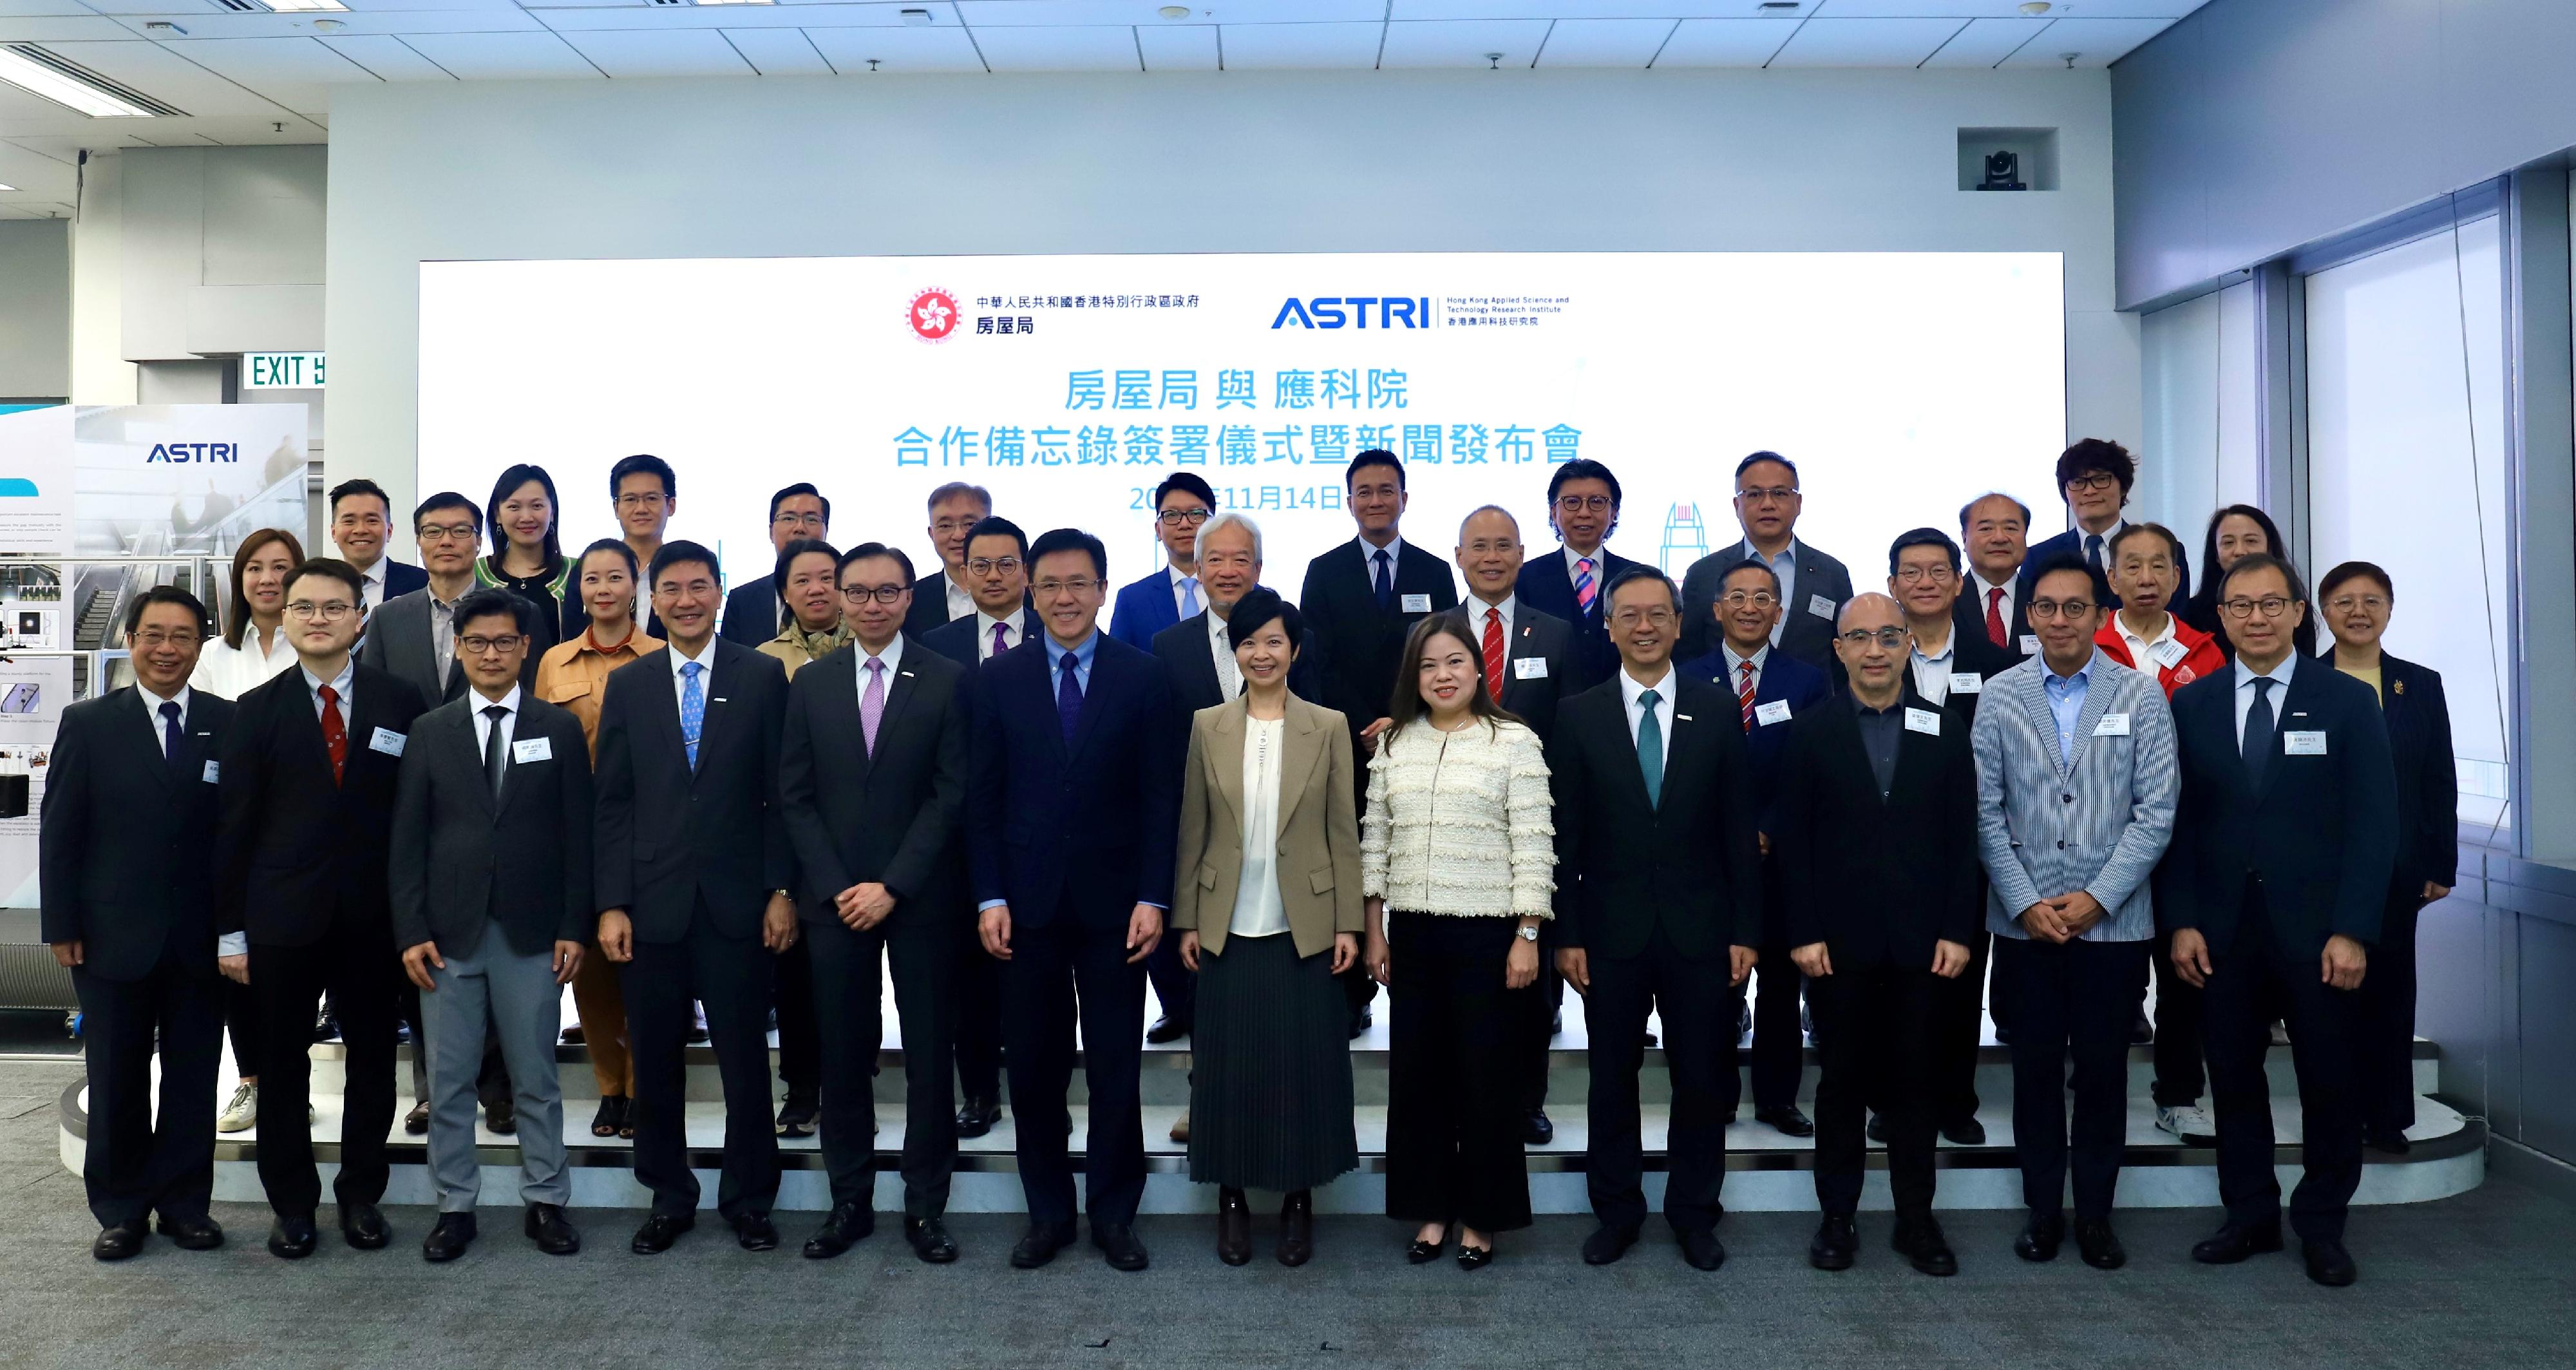 The Housing Bureau and the Hong Kong Applied Science and Technology Research Institute (ASTRI) signed a Memorandum of Understanding today (November 14) to jointly explore innovative solutions and applications for enhancing construction efficiency and safety, as well as optimising property management processes. Pictured are (first row, from fourth left) the Chief Executive Officer of ASTRI, Dr Denis Yip; the Board Chairman of ASTRI, Mr Sunny Lee; the Secretary for Innovation, Technology and Industry, Professor Sun Dong; the Secretary for Housing, Ms Winnie Ho; the Permanent Secretary for Housing/Director of Housing, Miss Rosanna Law; the Under Secretary for Housing, Mr Victor Tai, and other guests at the signing ceremony.